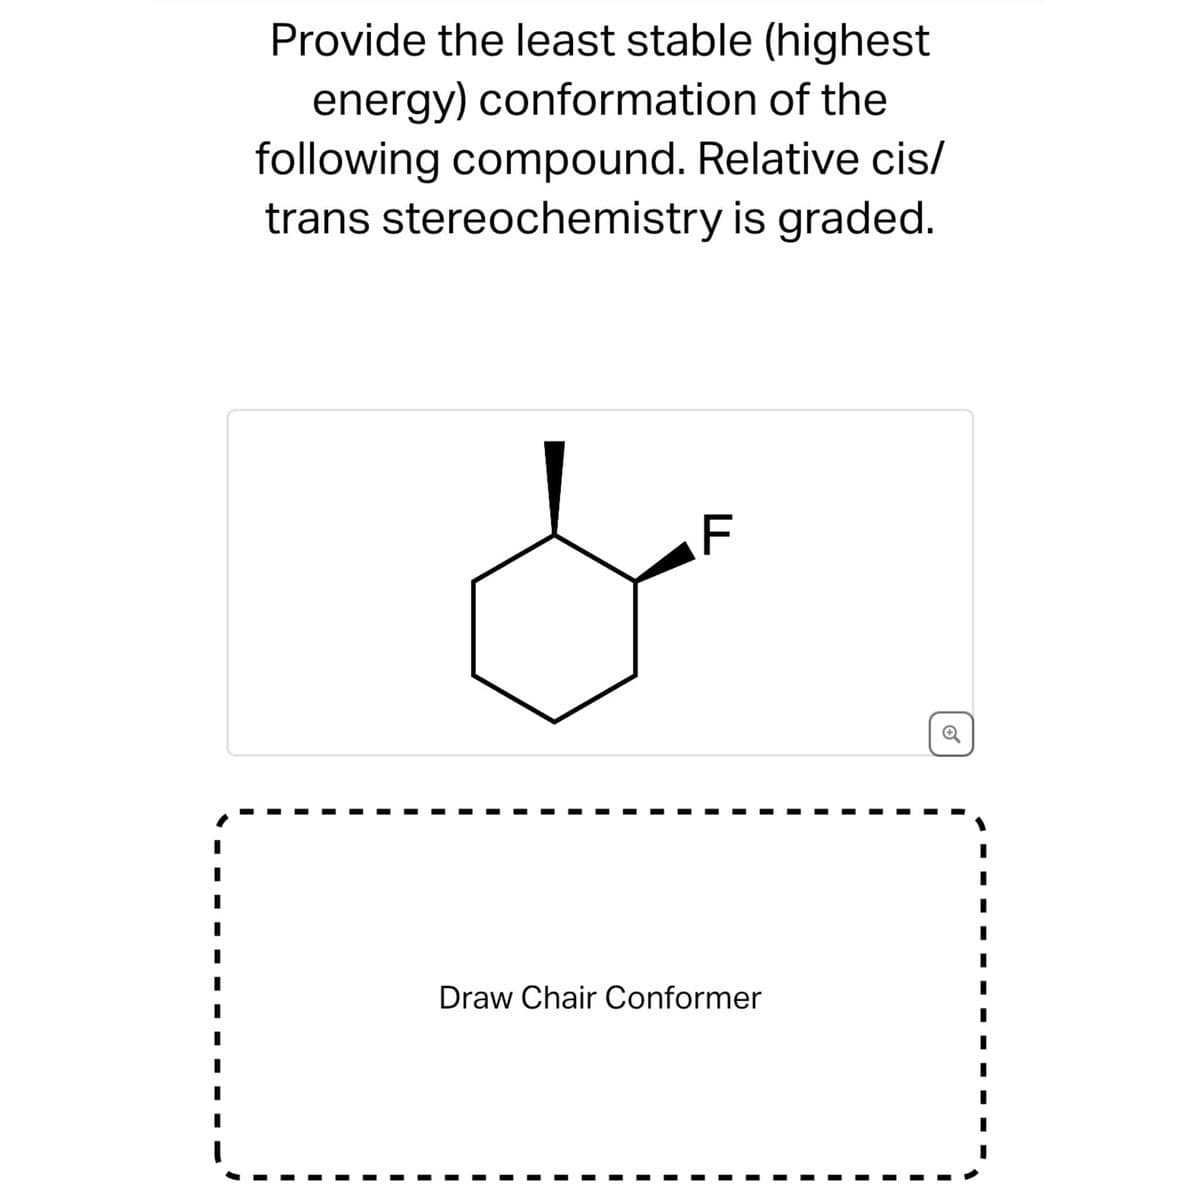 Provide the least stable (highest
energy) conformation of the
following compound. Relative cis/
trans stereochemistry is graded.
F
Draw Chair Conformer
1